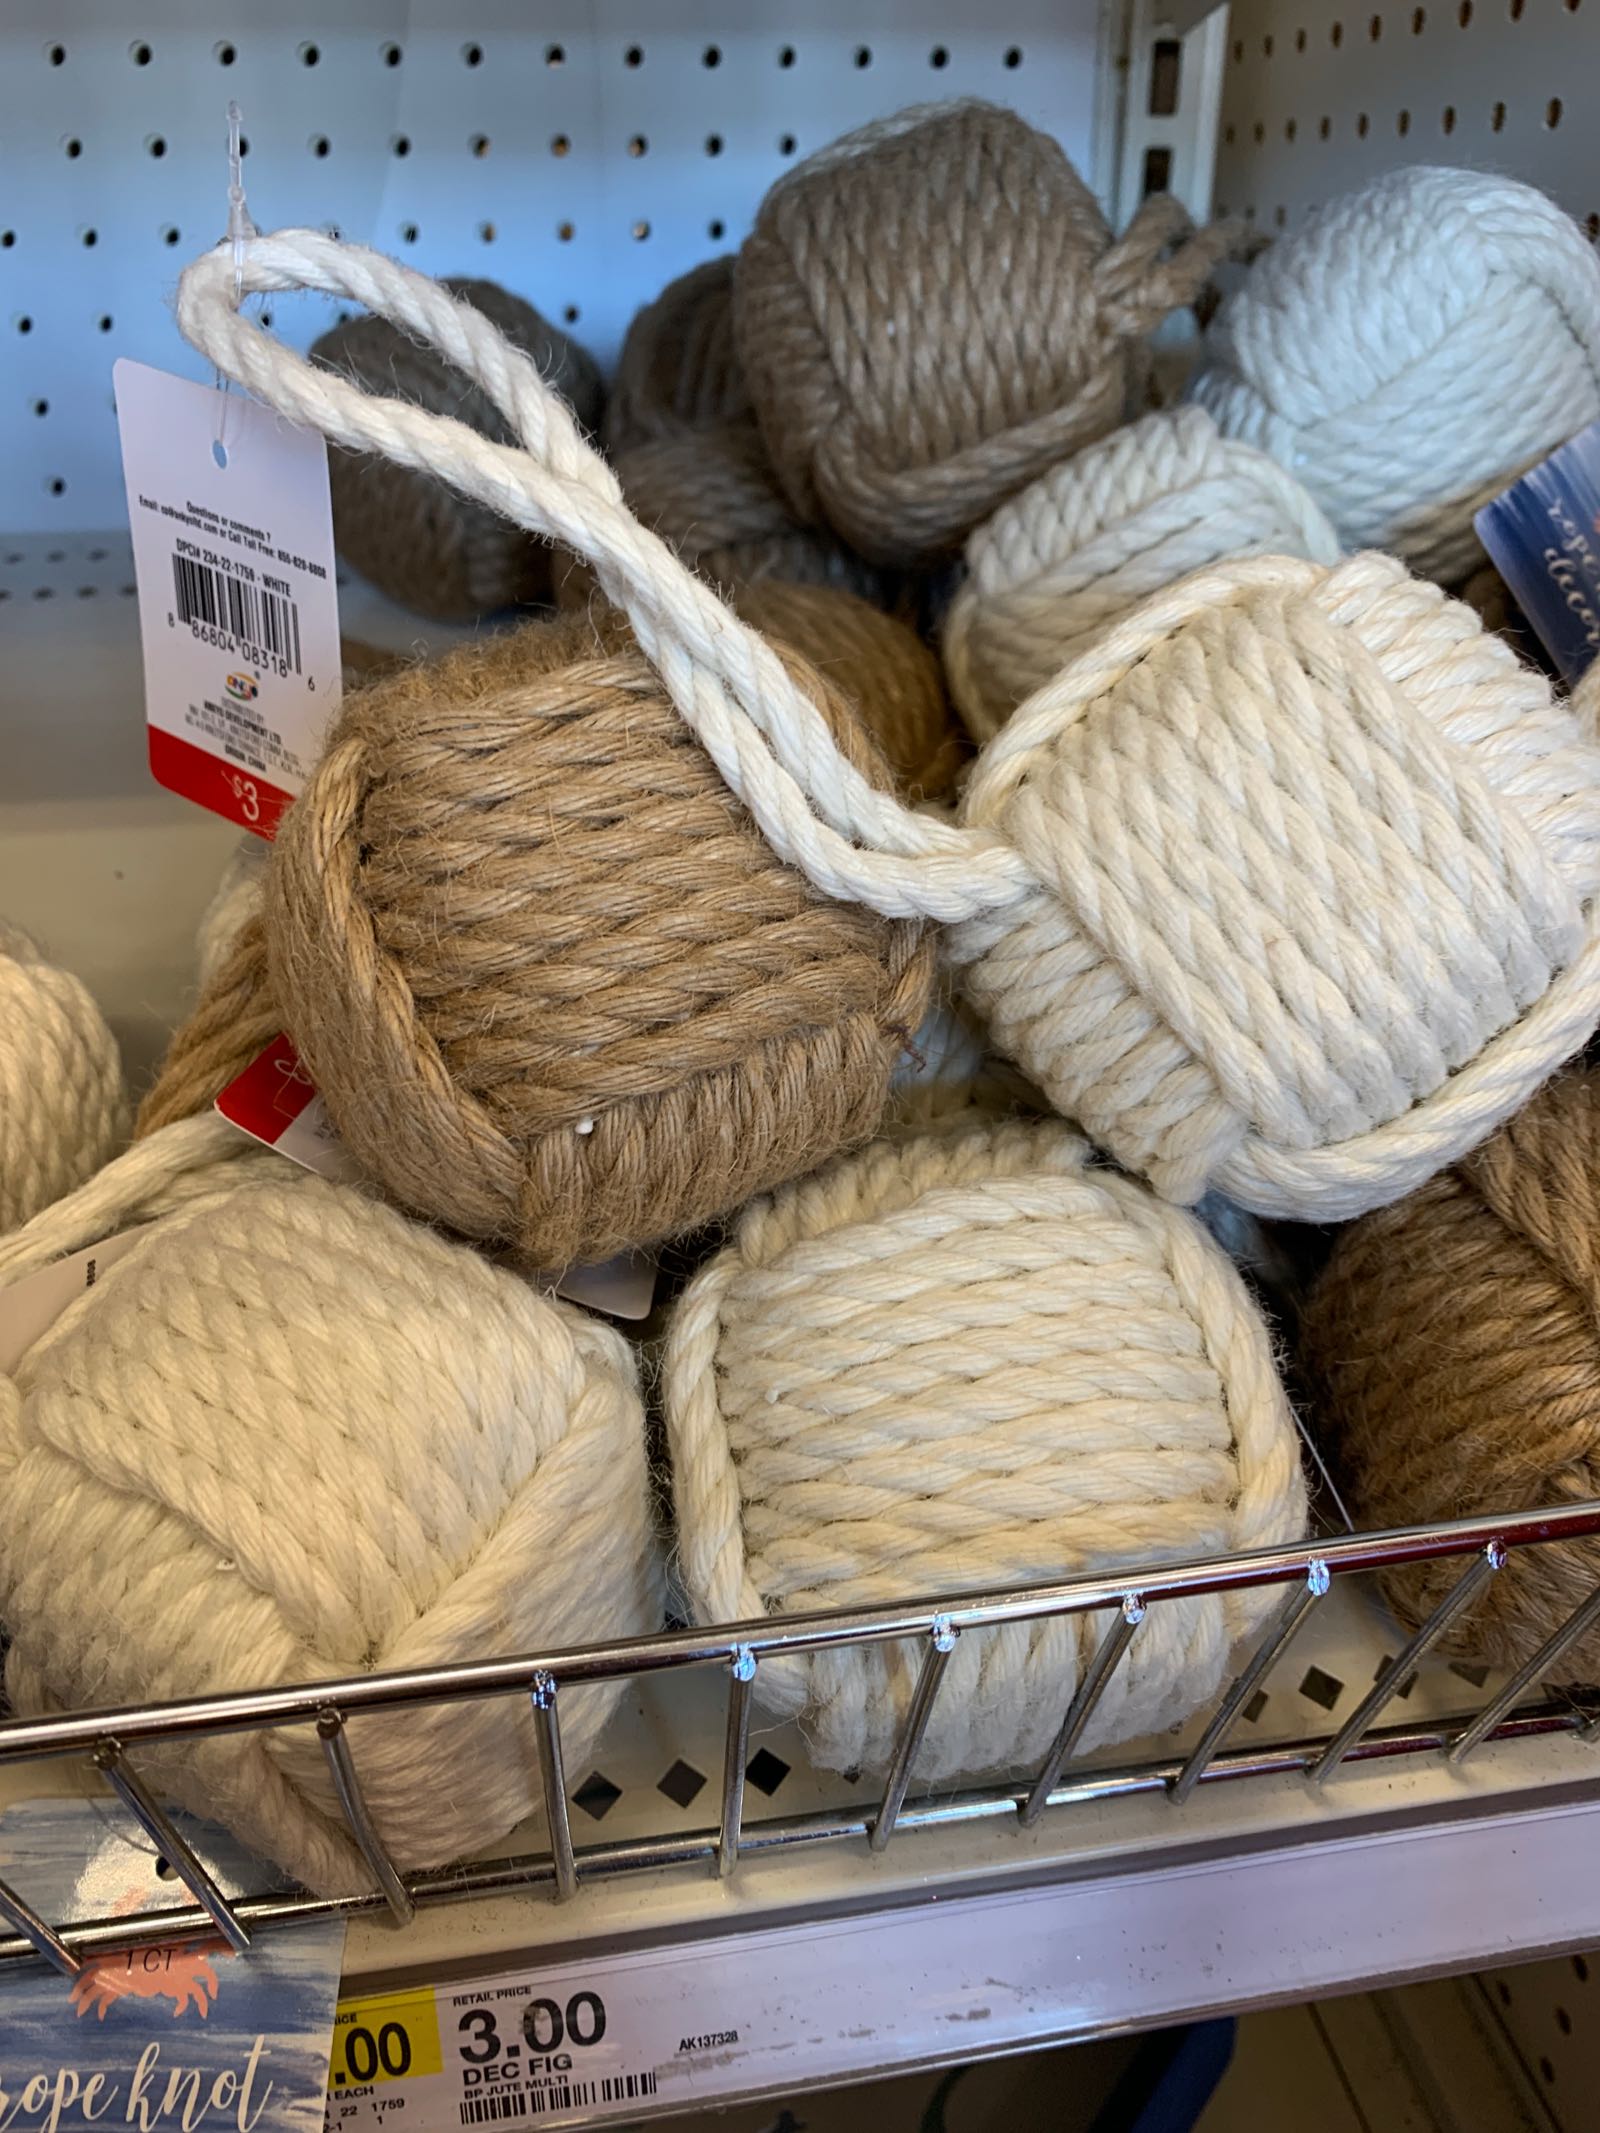 Cute nautical decor at Target in the dollar spot!